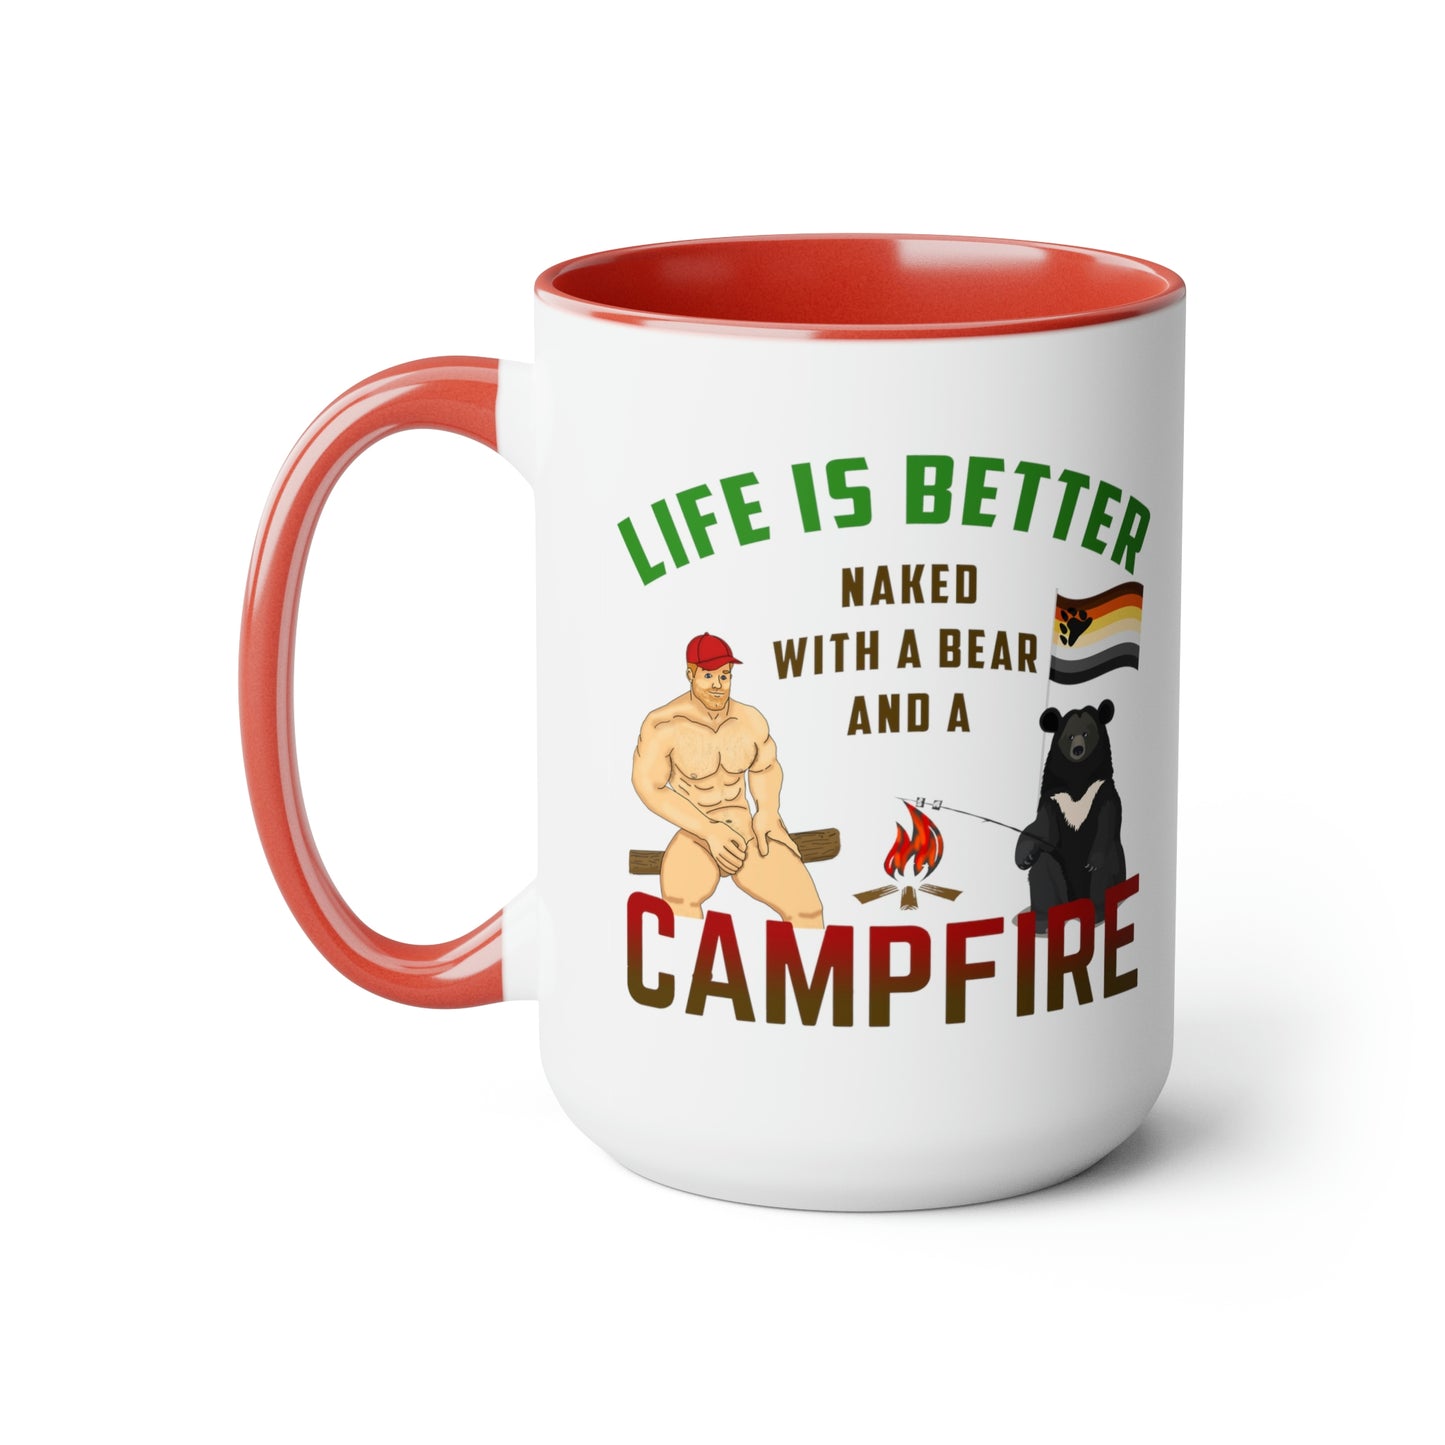 Life is Better Naked with a Bear and a Campfire Two-Tone Coffee Mug, 15oz